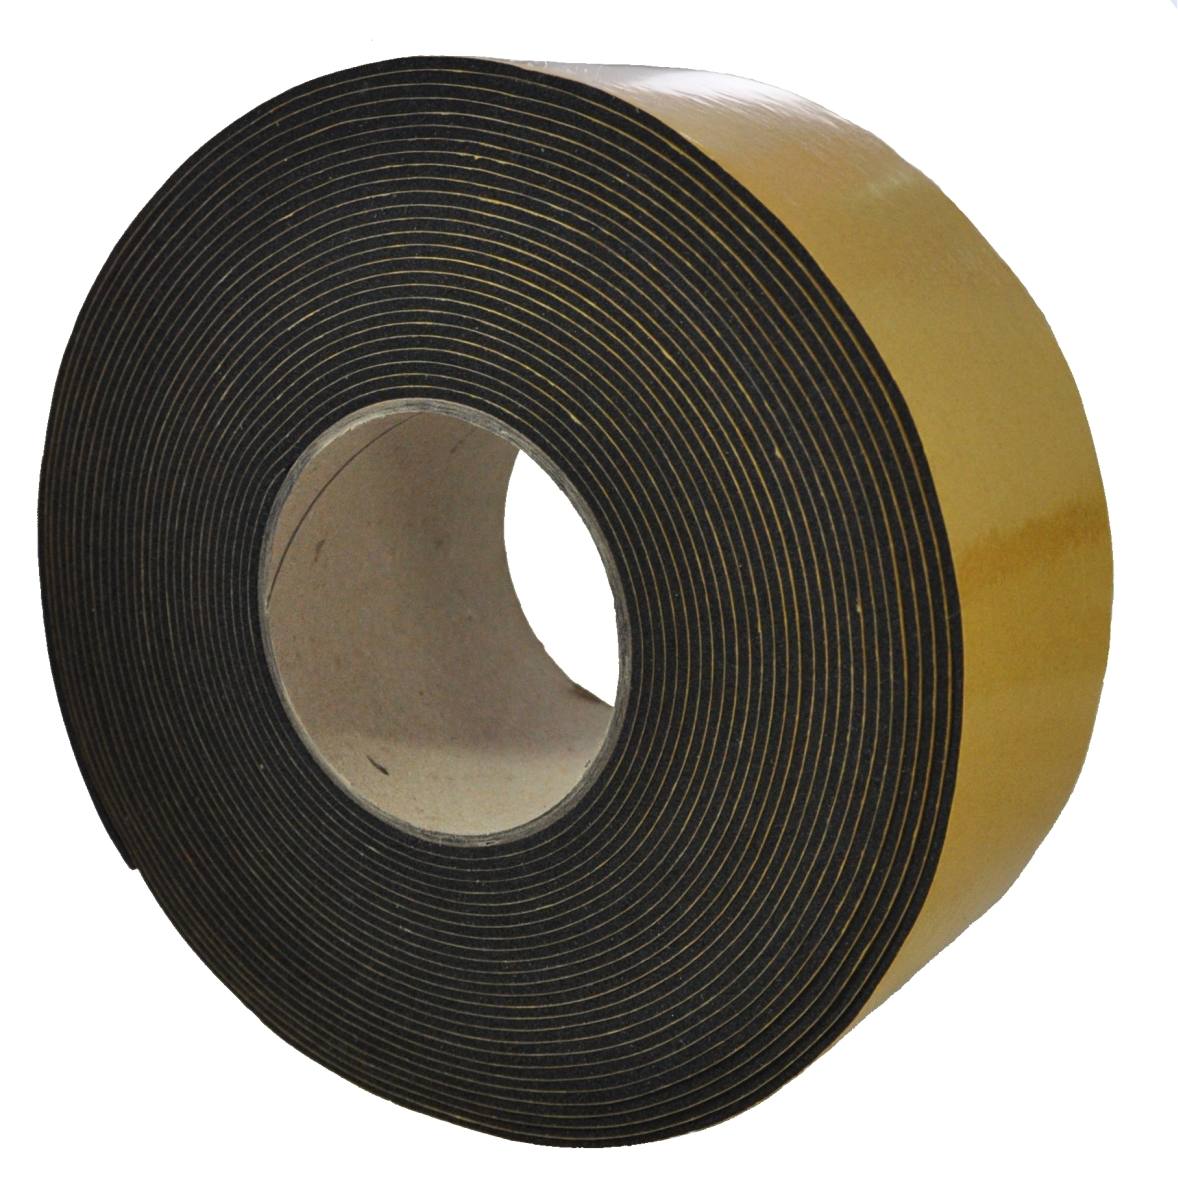 S-K-S EPDM 3mmx12mmx10m black self-adhesive on one side